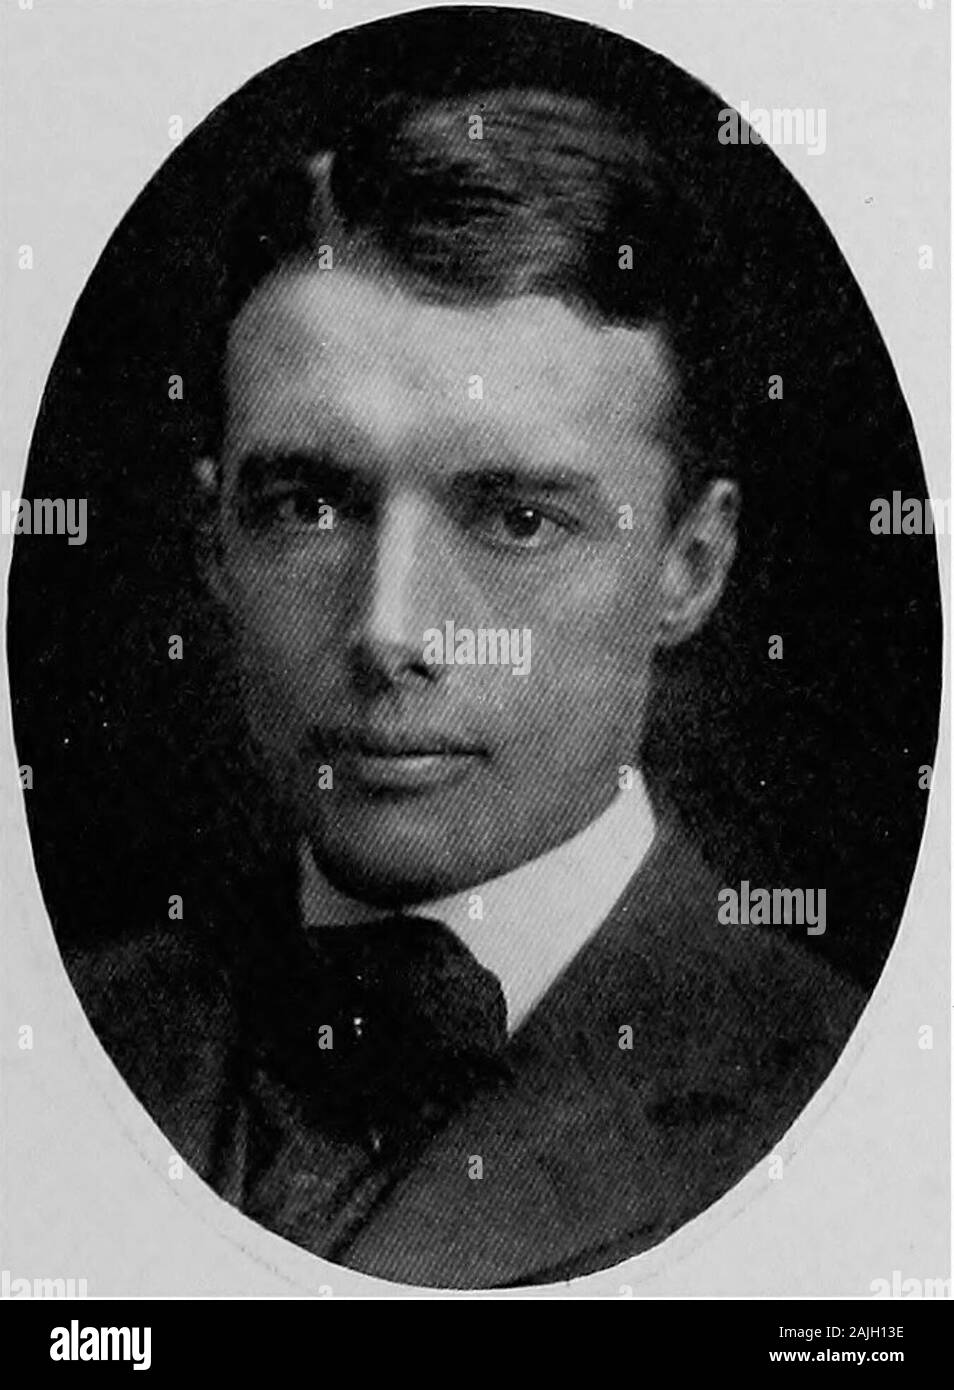 Empire state notables, 1914 . STEPHEN PHILBIN ANDERTON Lawyer, Beekman, Menden & Grisconi New York City. Stock Photo